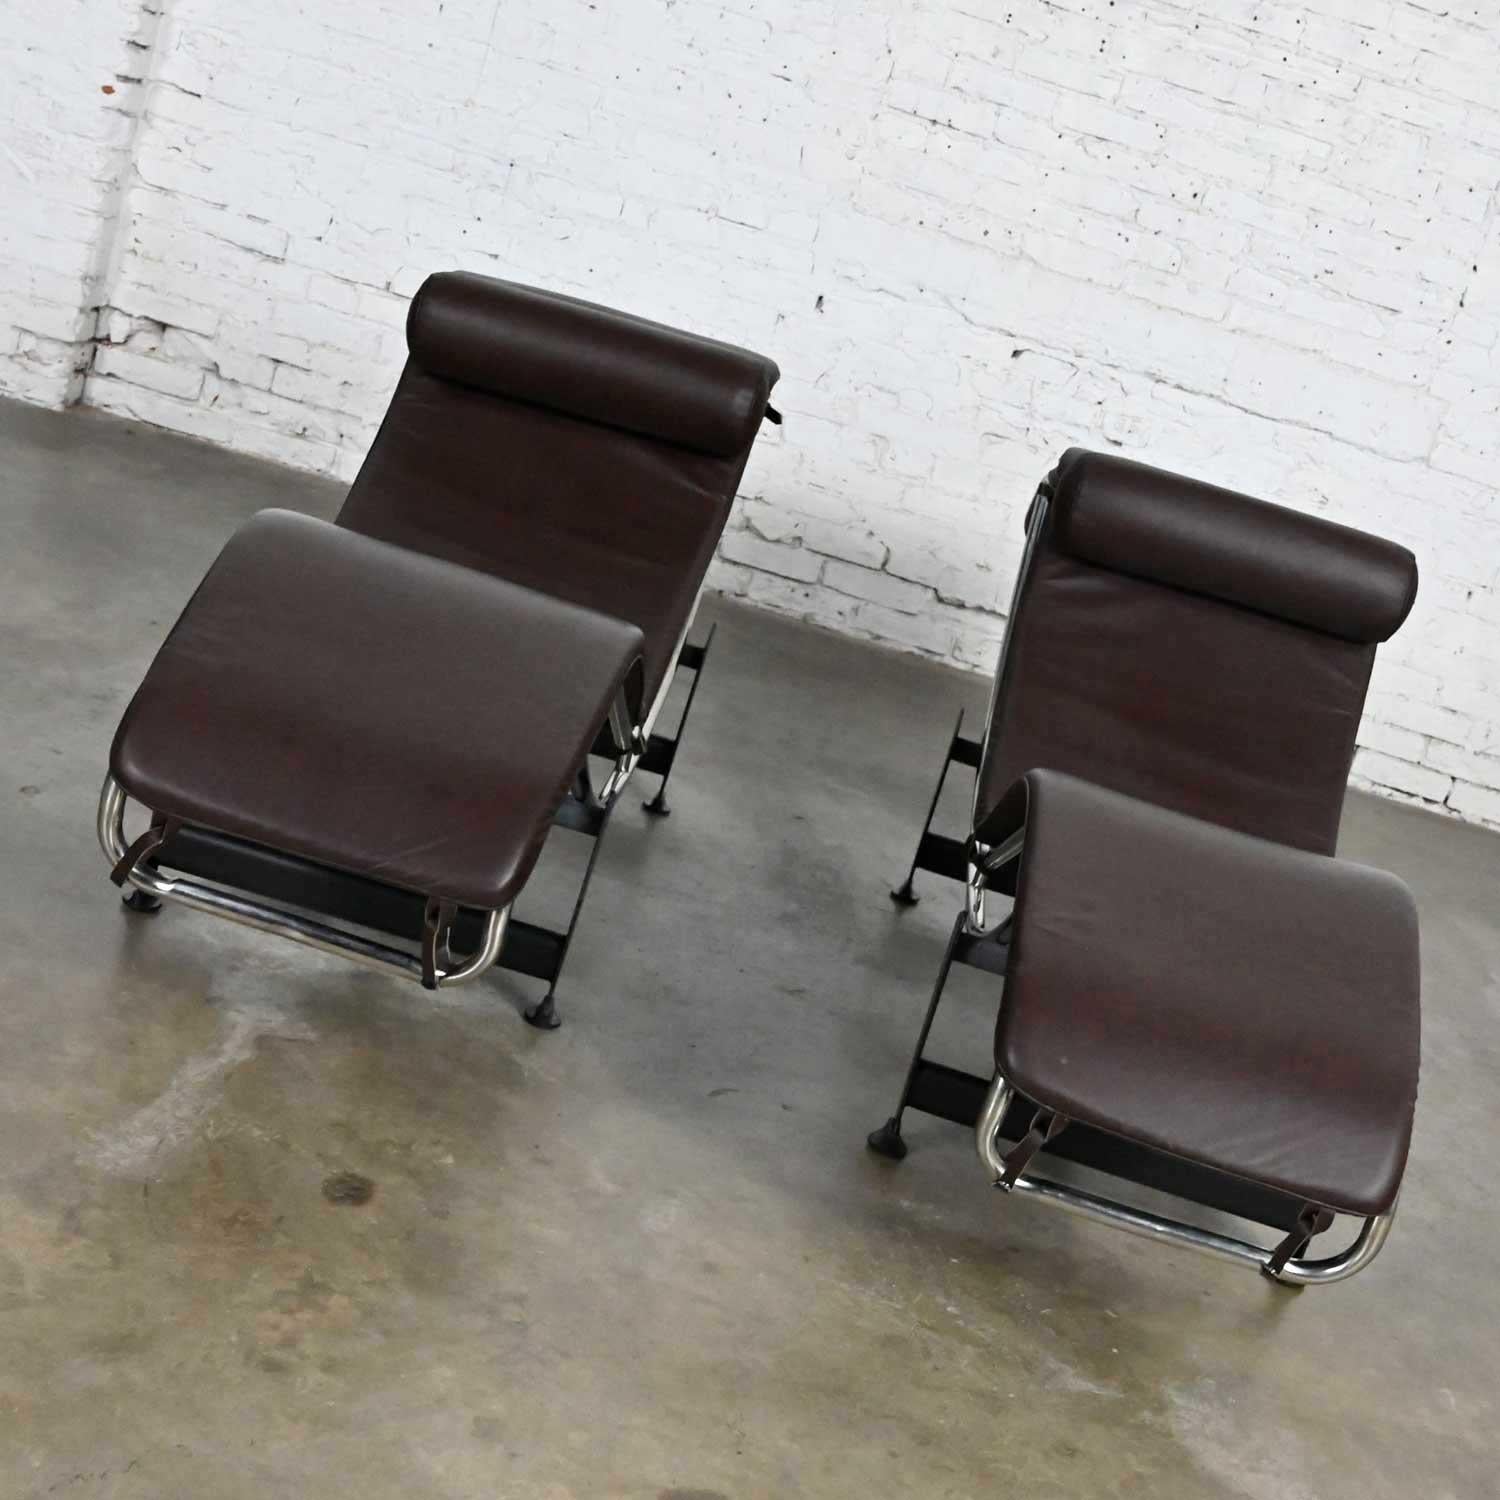 Fabulous pair chaise lounge chairs with chrome frames, black painted steel bases, and brown leather cushions in the style of Le Corbusier LC4. Not an “official” chair. Beautiful condition, keeping in mind that these are vintage and not new so will